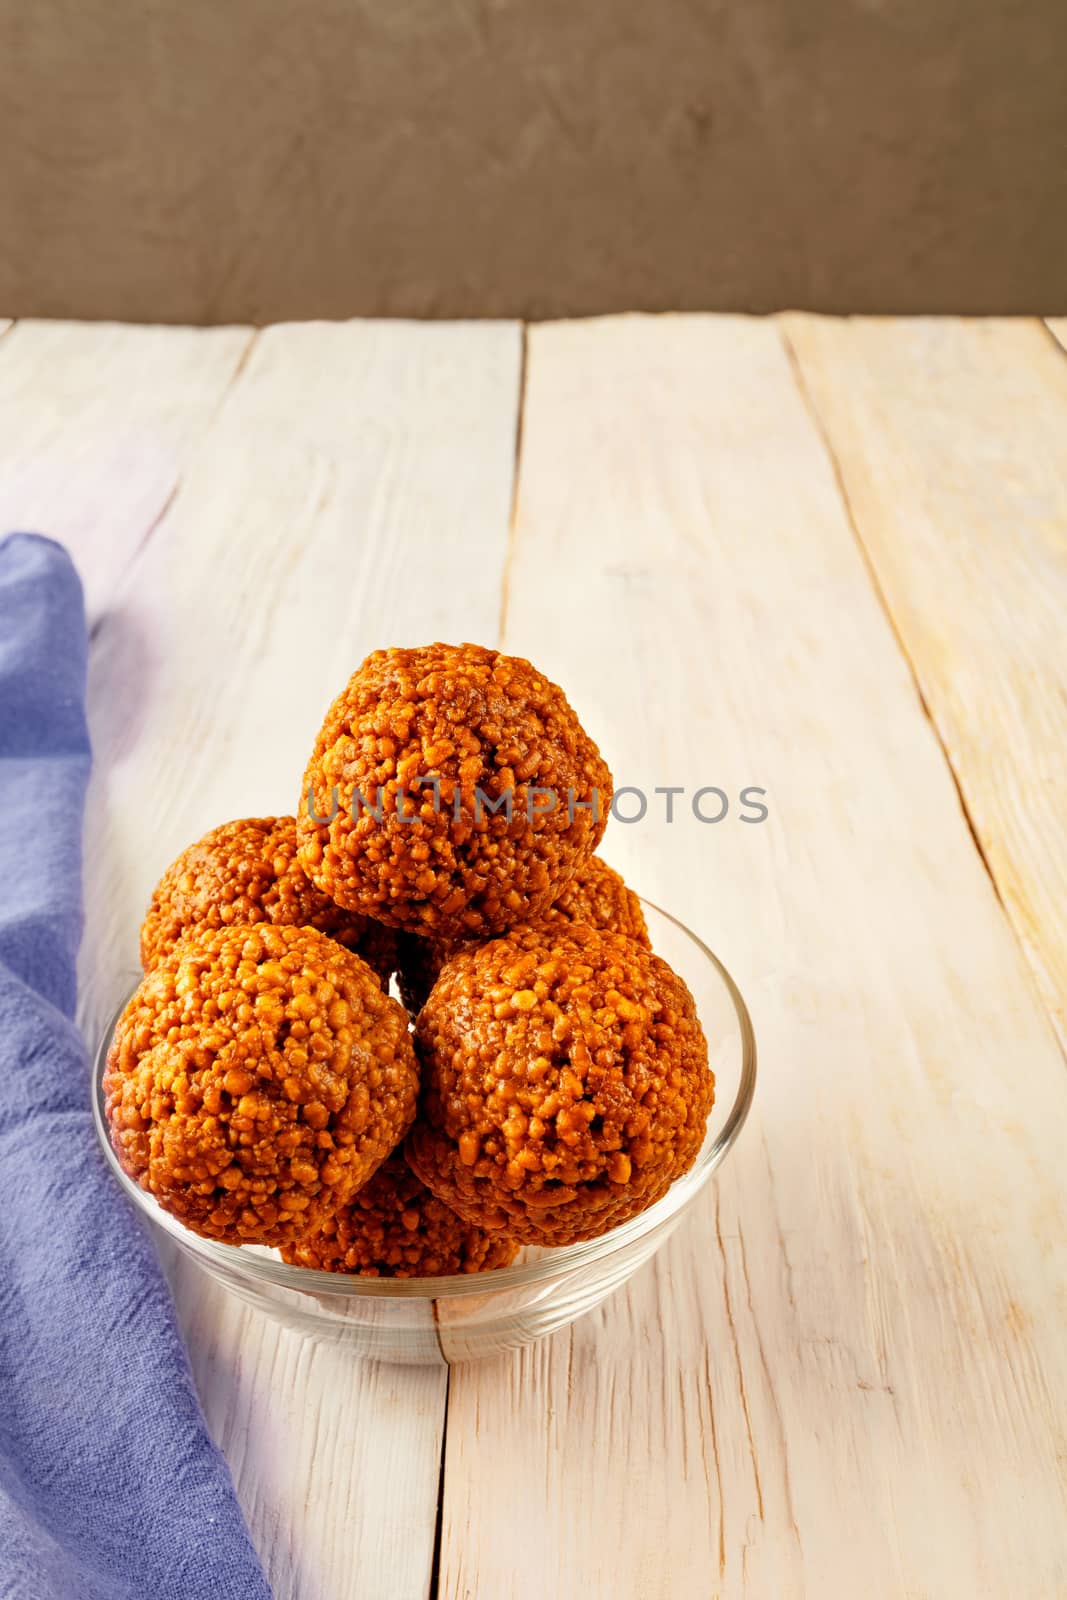 Homemade energy balls with walnuts and honey, light wooden surface and glassware. Rustic style. Vegan raw snacks. Healthy sweet food. Copy space, vertical image, close-up.